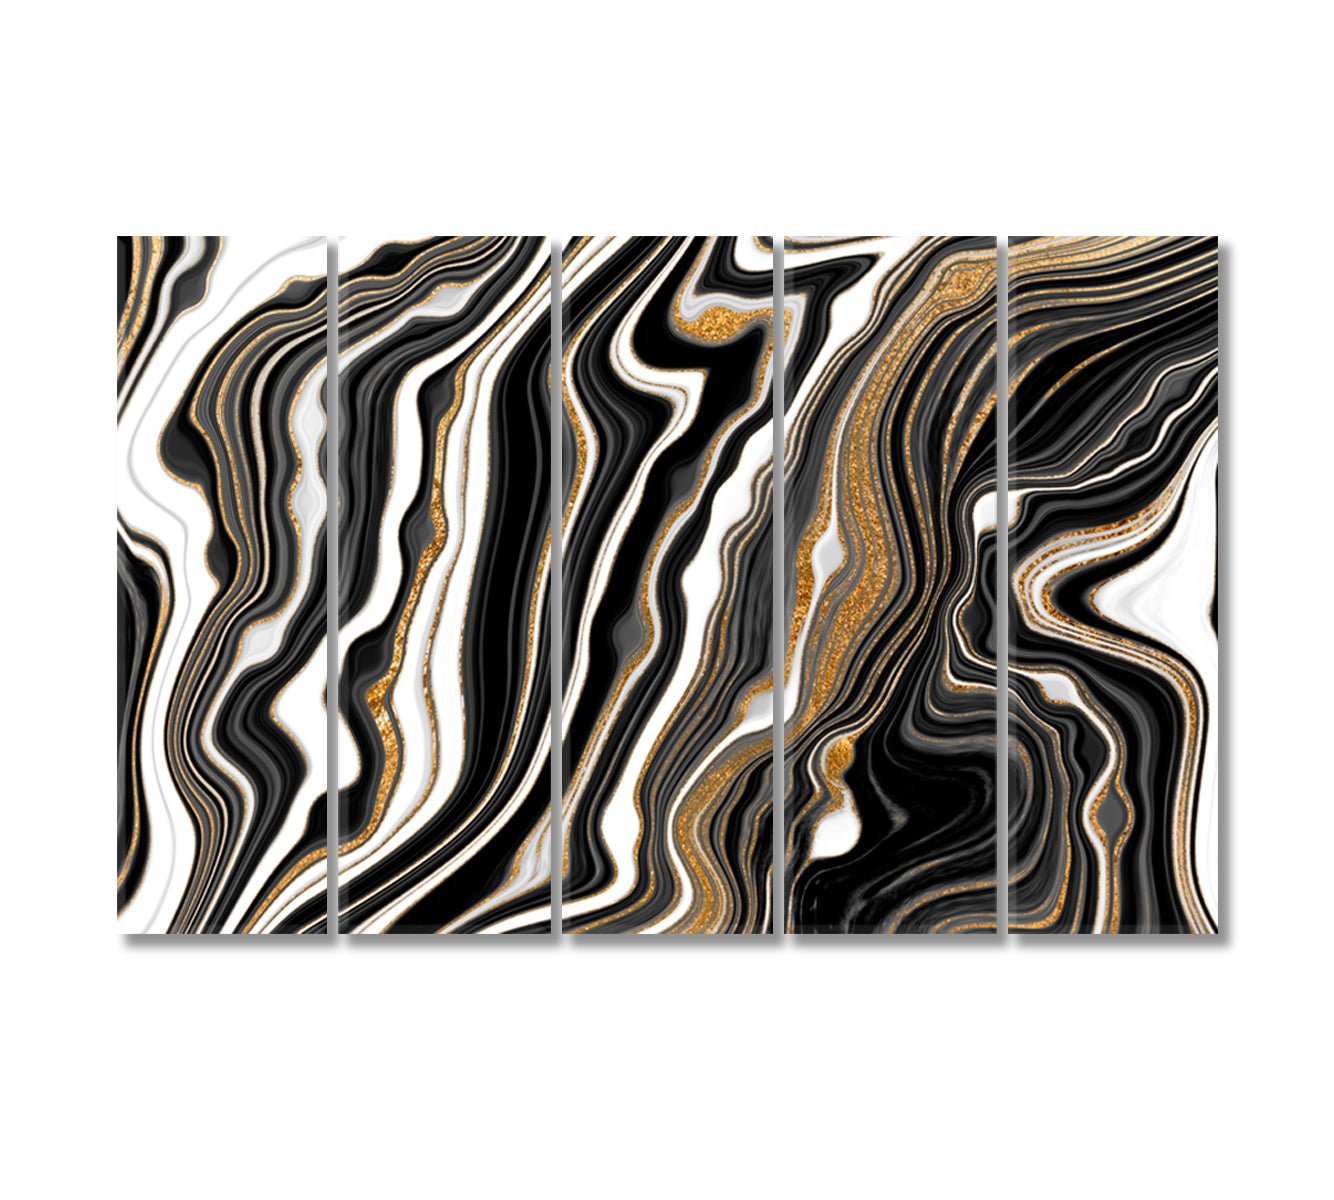 Abstract Black and White Agate Canvas Print-Canvas Print-CetArt-5 Panels-36x24 inches-CetArt